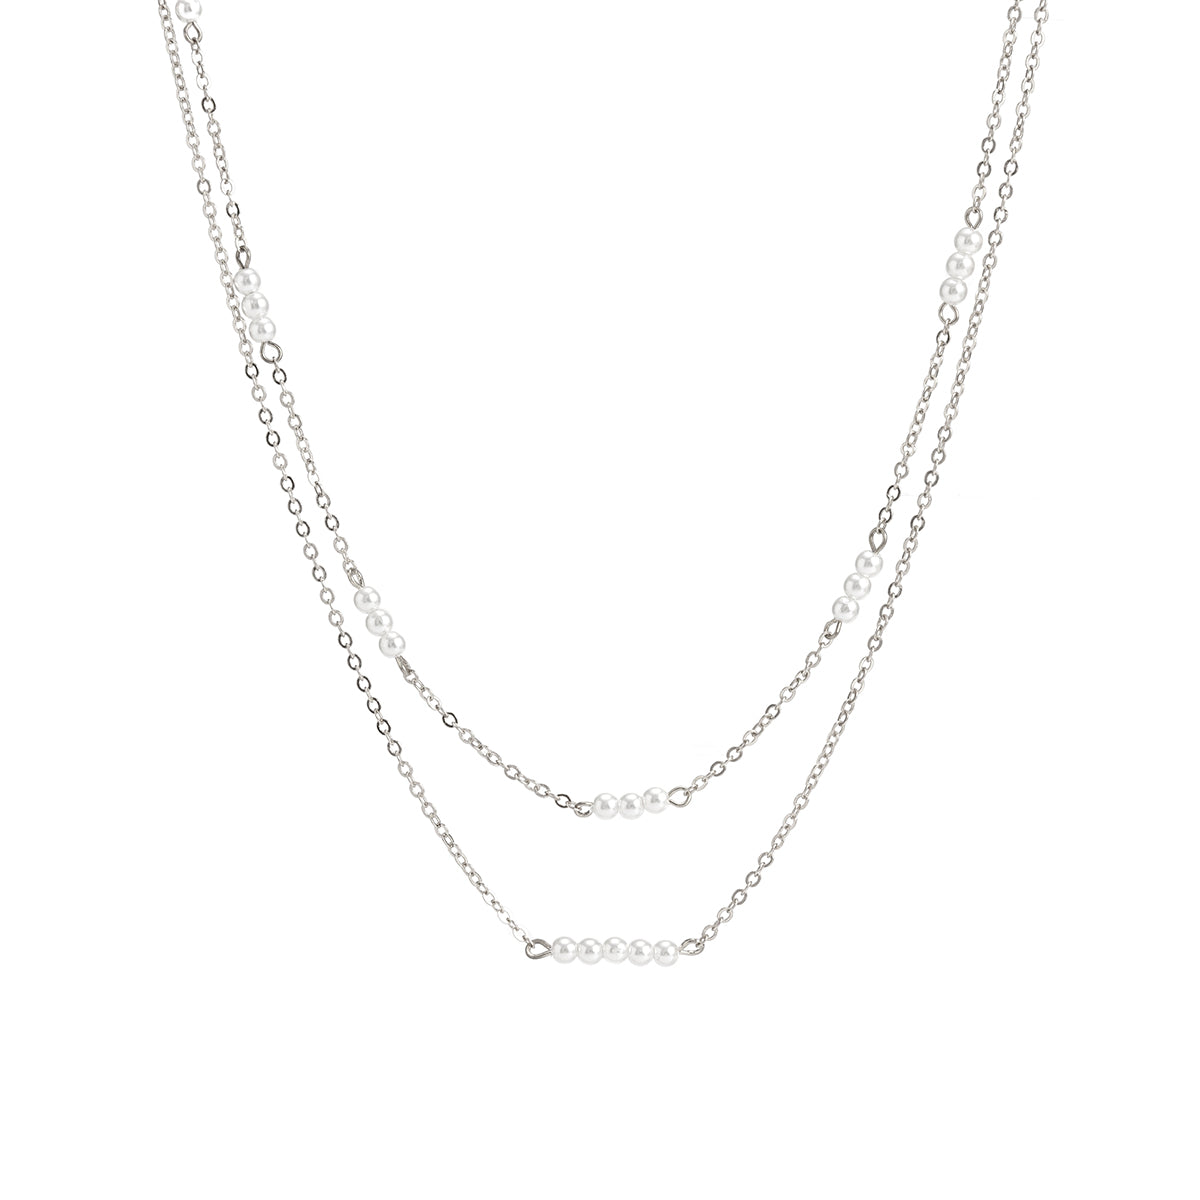 Pearl & Silver-Plated Layered Necklace